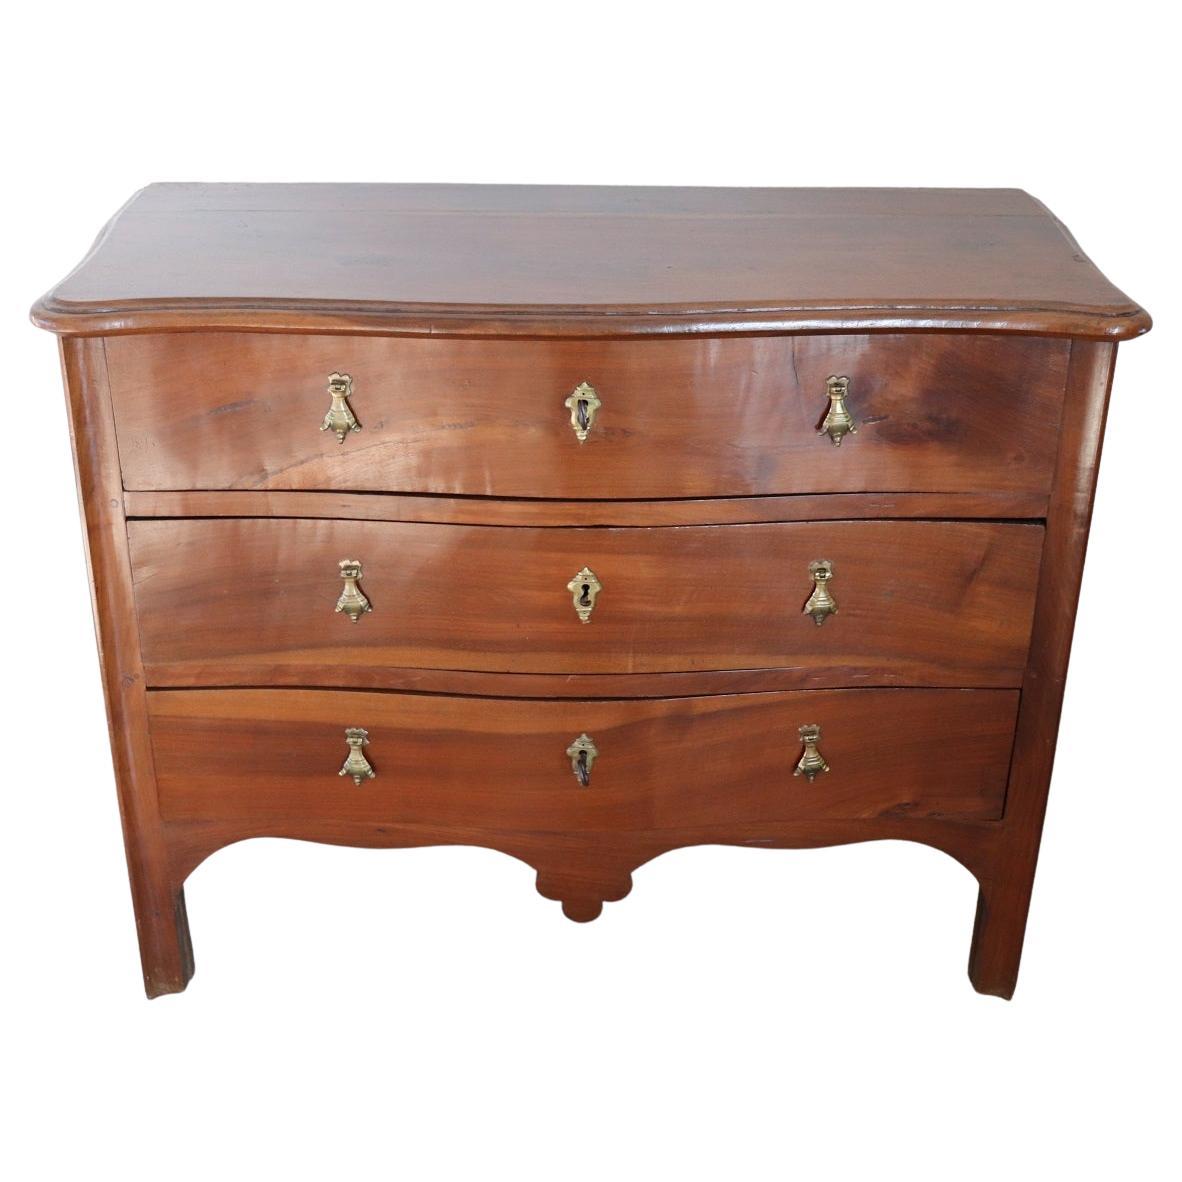 18th Century Italian Louis XV Walnut Antique Commode or Chest of Drawers For Sale